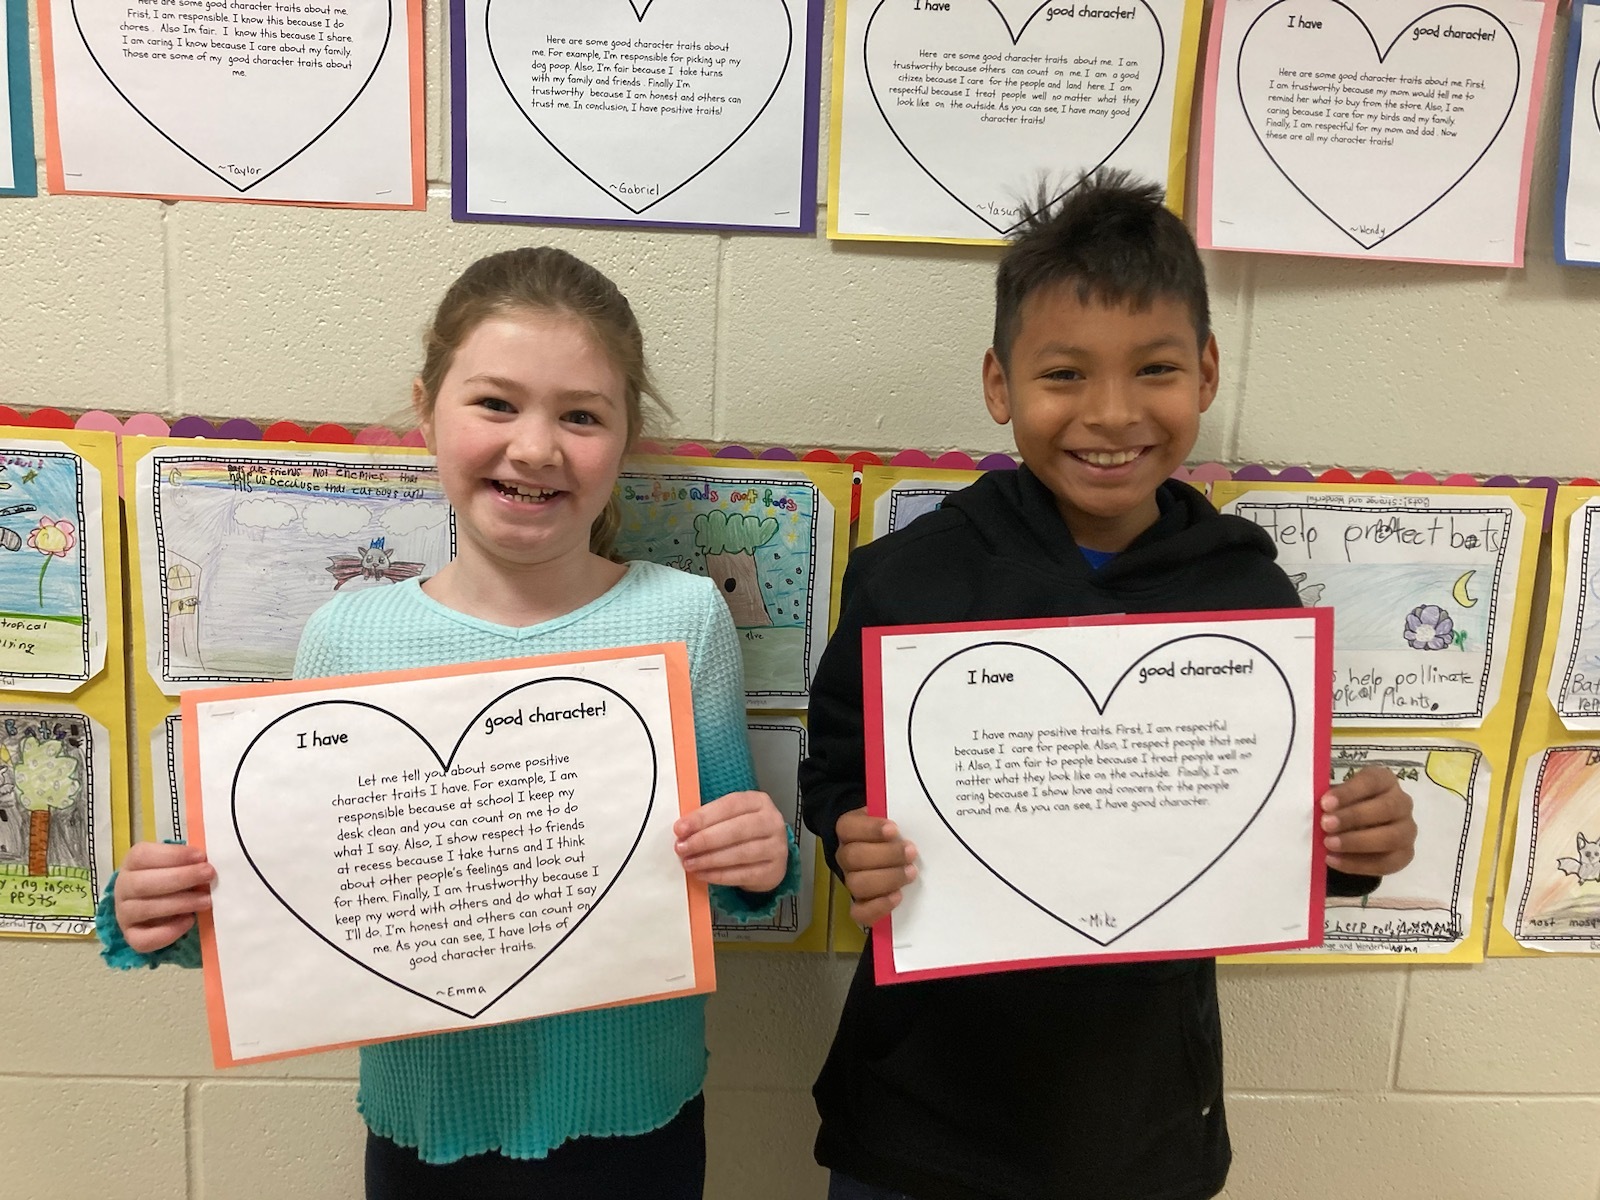 Hampton Bays Elementary School students in Jennifer Warren’s third grade class have been engaging lessons about  social and emotional health. They recently discussed the six pillars of character, which are fairness, responsibility, trustworthiness, caring, respect and citizenship, and what it means to have good character. They also brainstormed examples of these traits in action and wrote about ways they can demonstrate them in their everyday
lives. Emma Kirst, left, and Mike De Los Santos Vasquez were among the students who participated. COURTESY HAMPTON BAYS SCHOOL DISTRICT